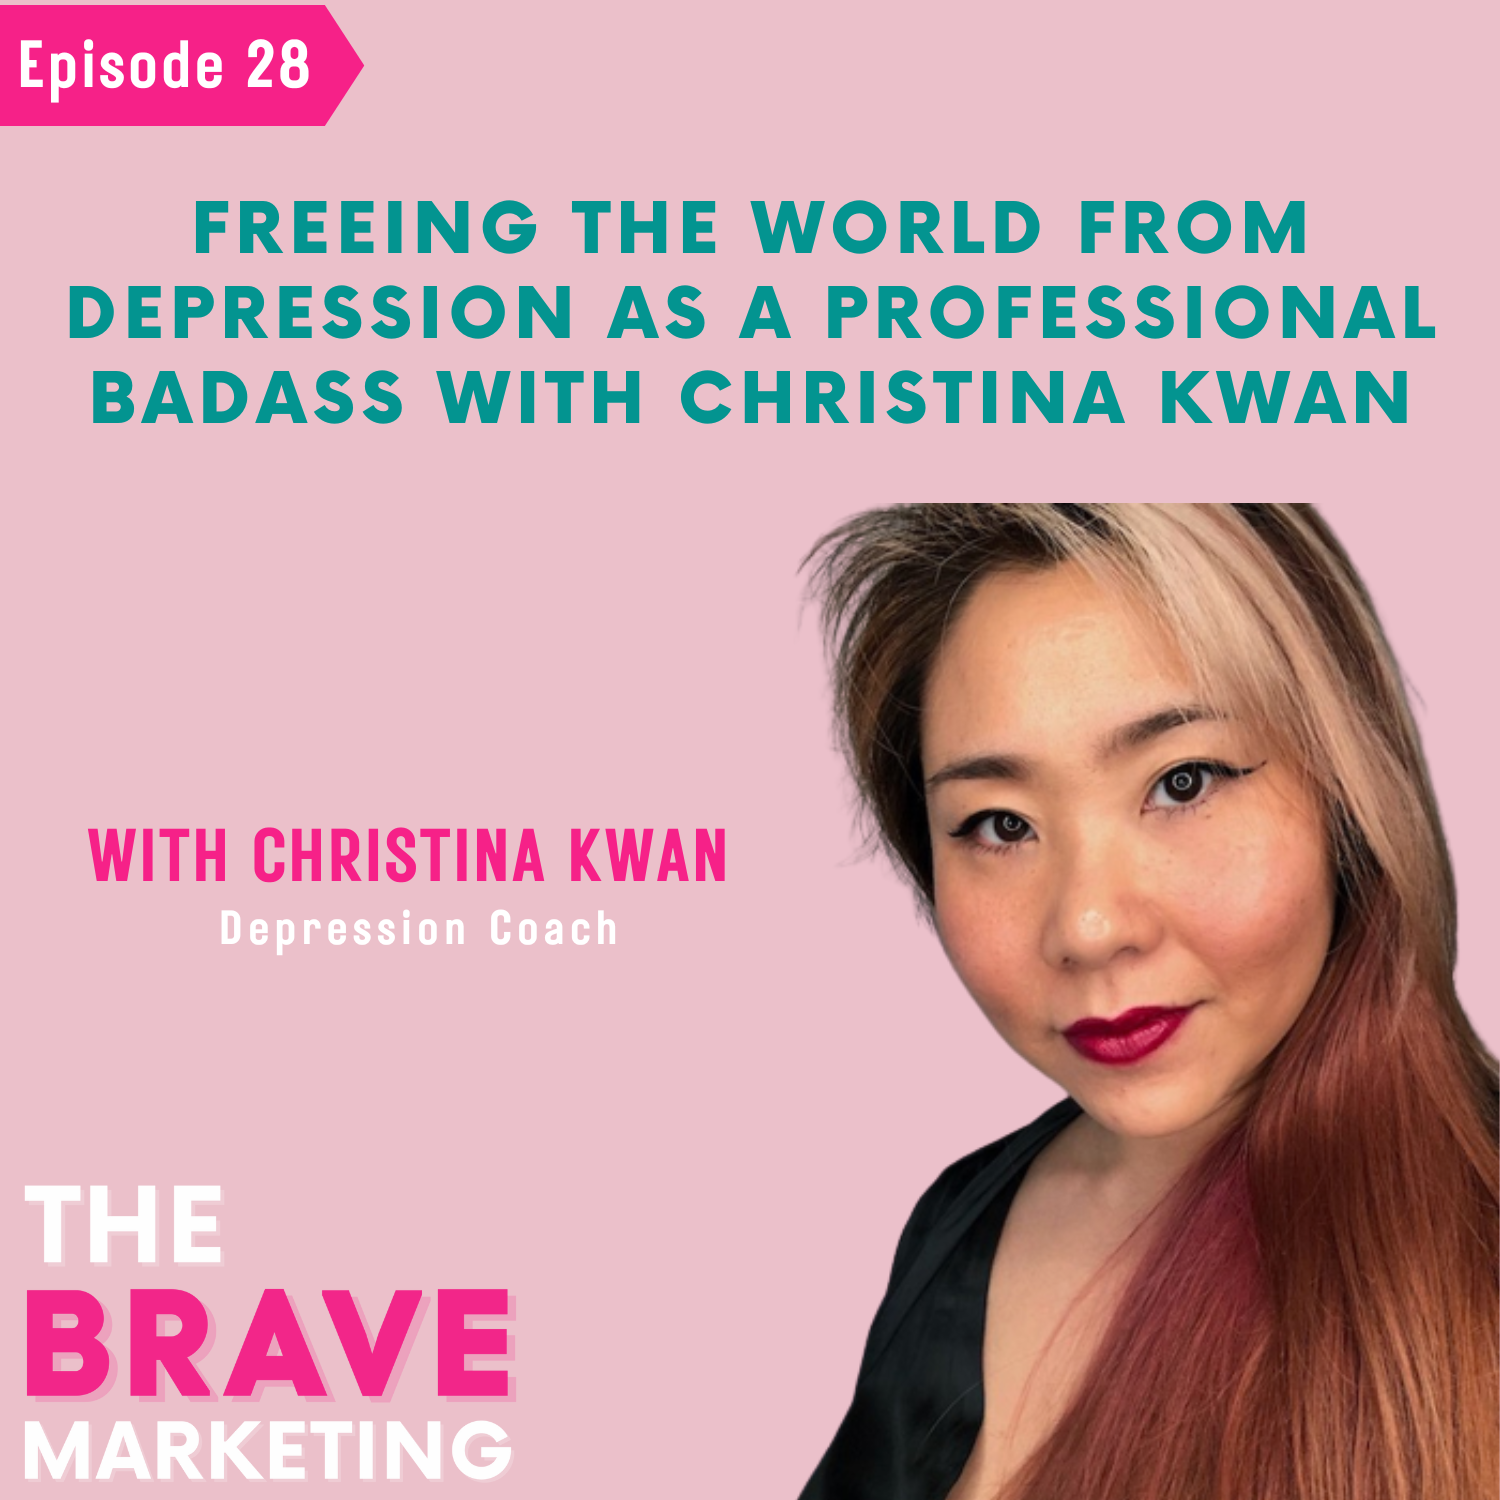 Freeing the world from Depression as a professional badass with Christina Kwan